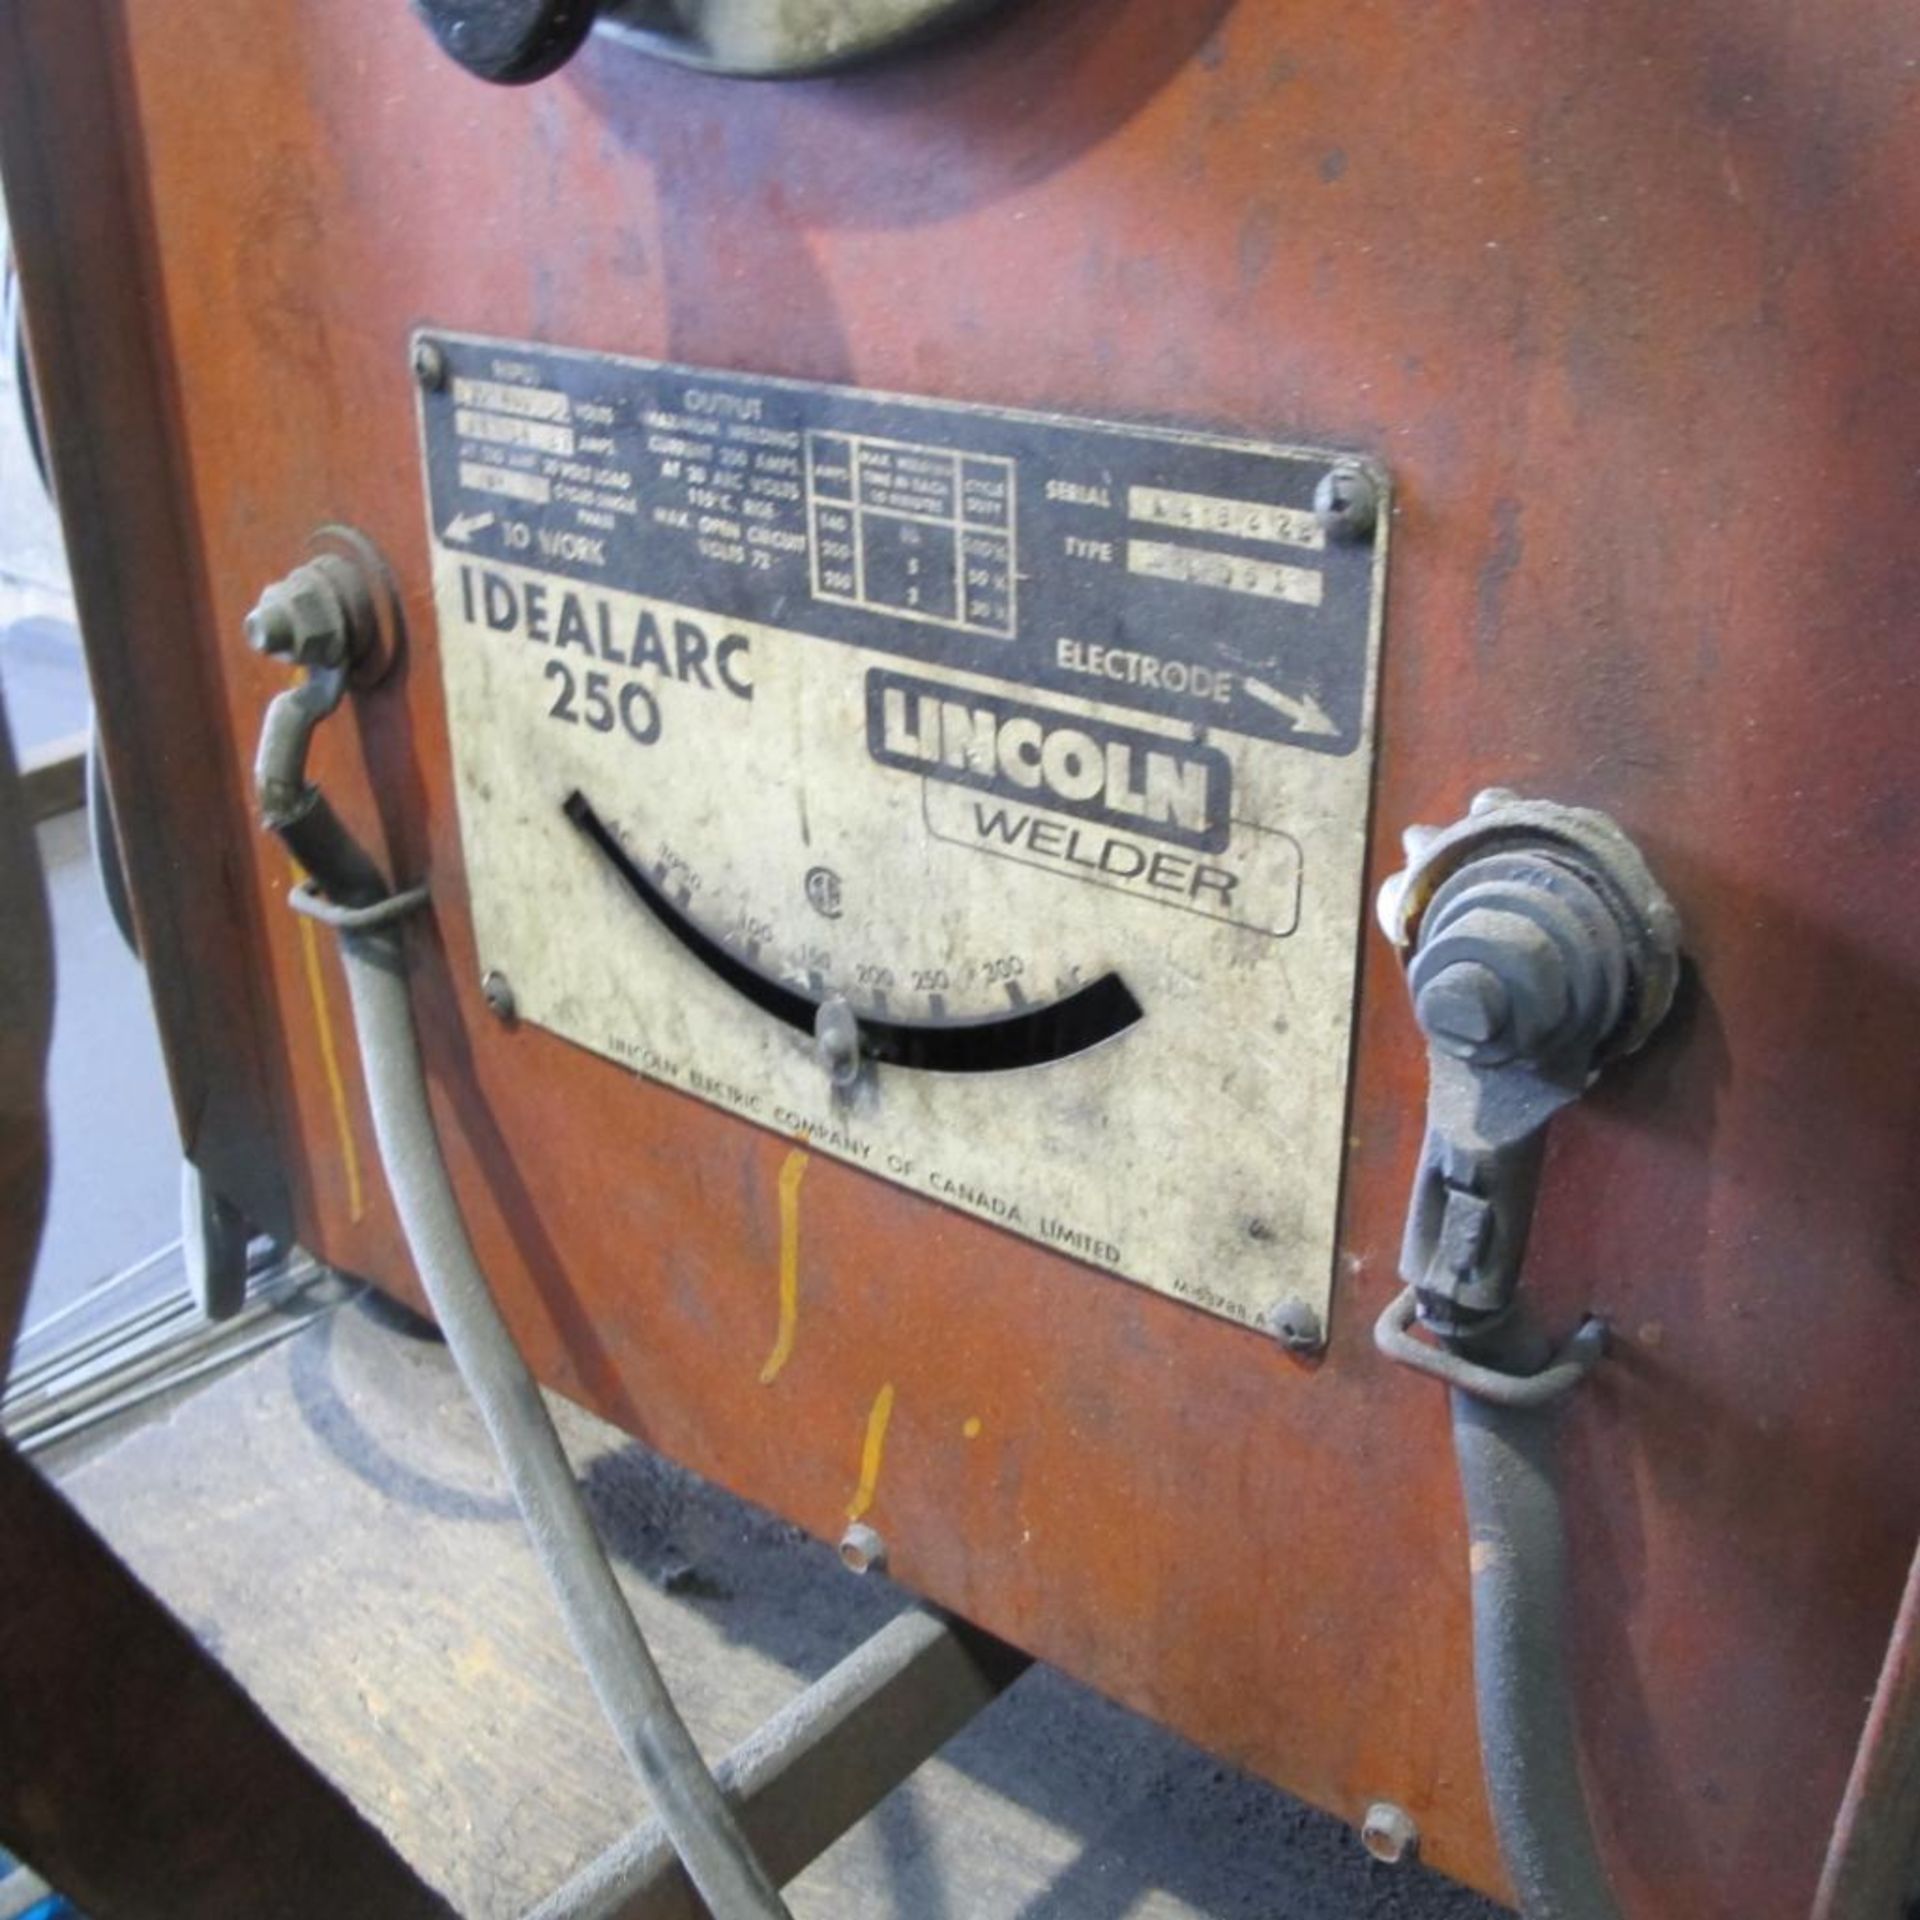 LINCOLN ELECTRIC IDEALARC 250 WELDER W/CART AND CABLES, MODEL A1051 - Image 2 of 2